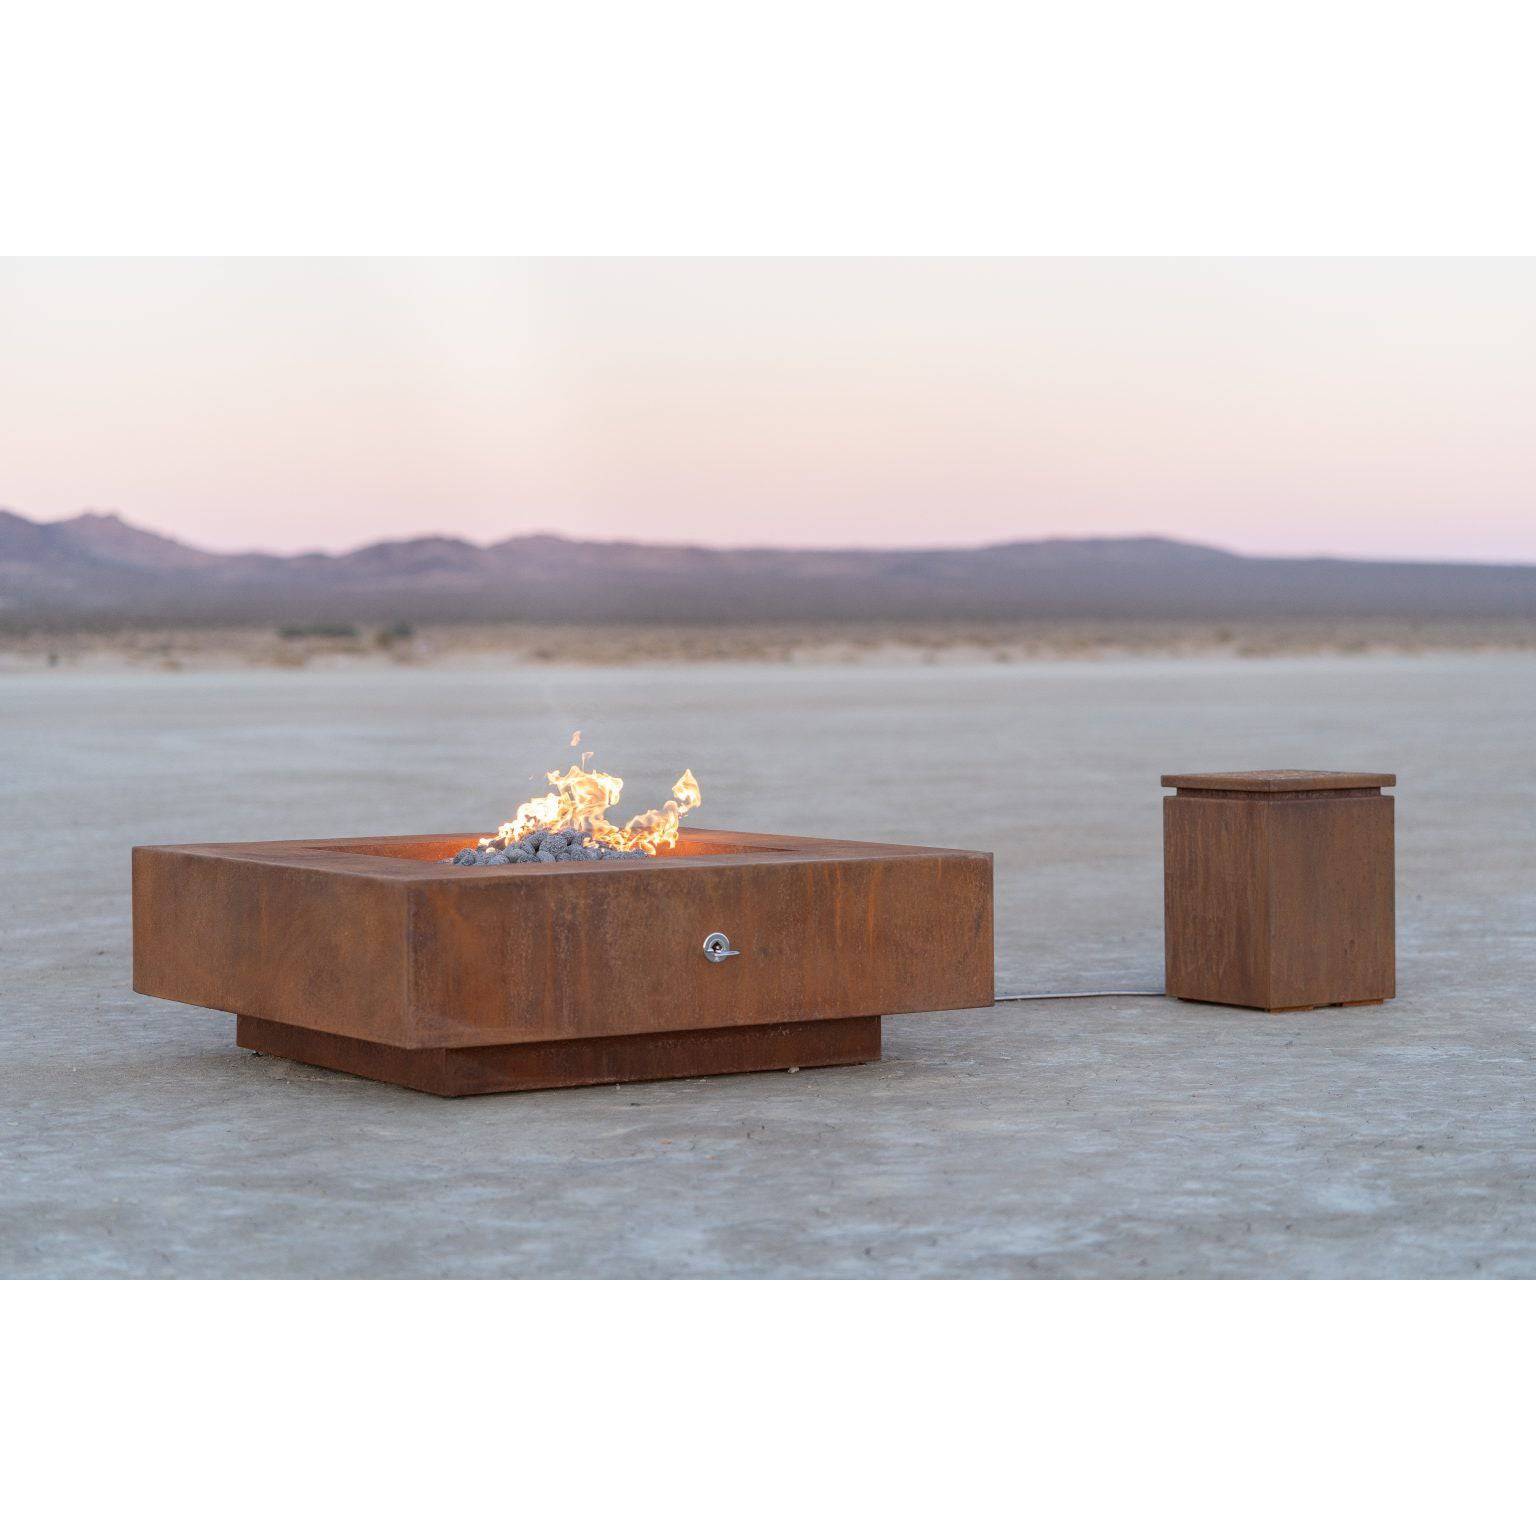 The Outdoor Plus Cabo Square Fire Pit Stainless Steel OPT-CBSQXXSS - Serenity Provision